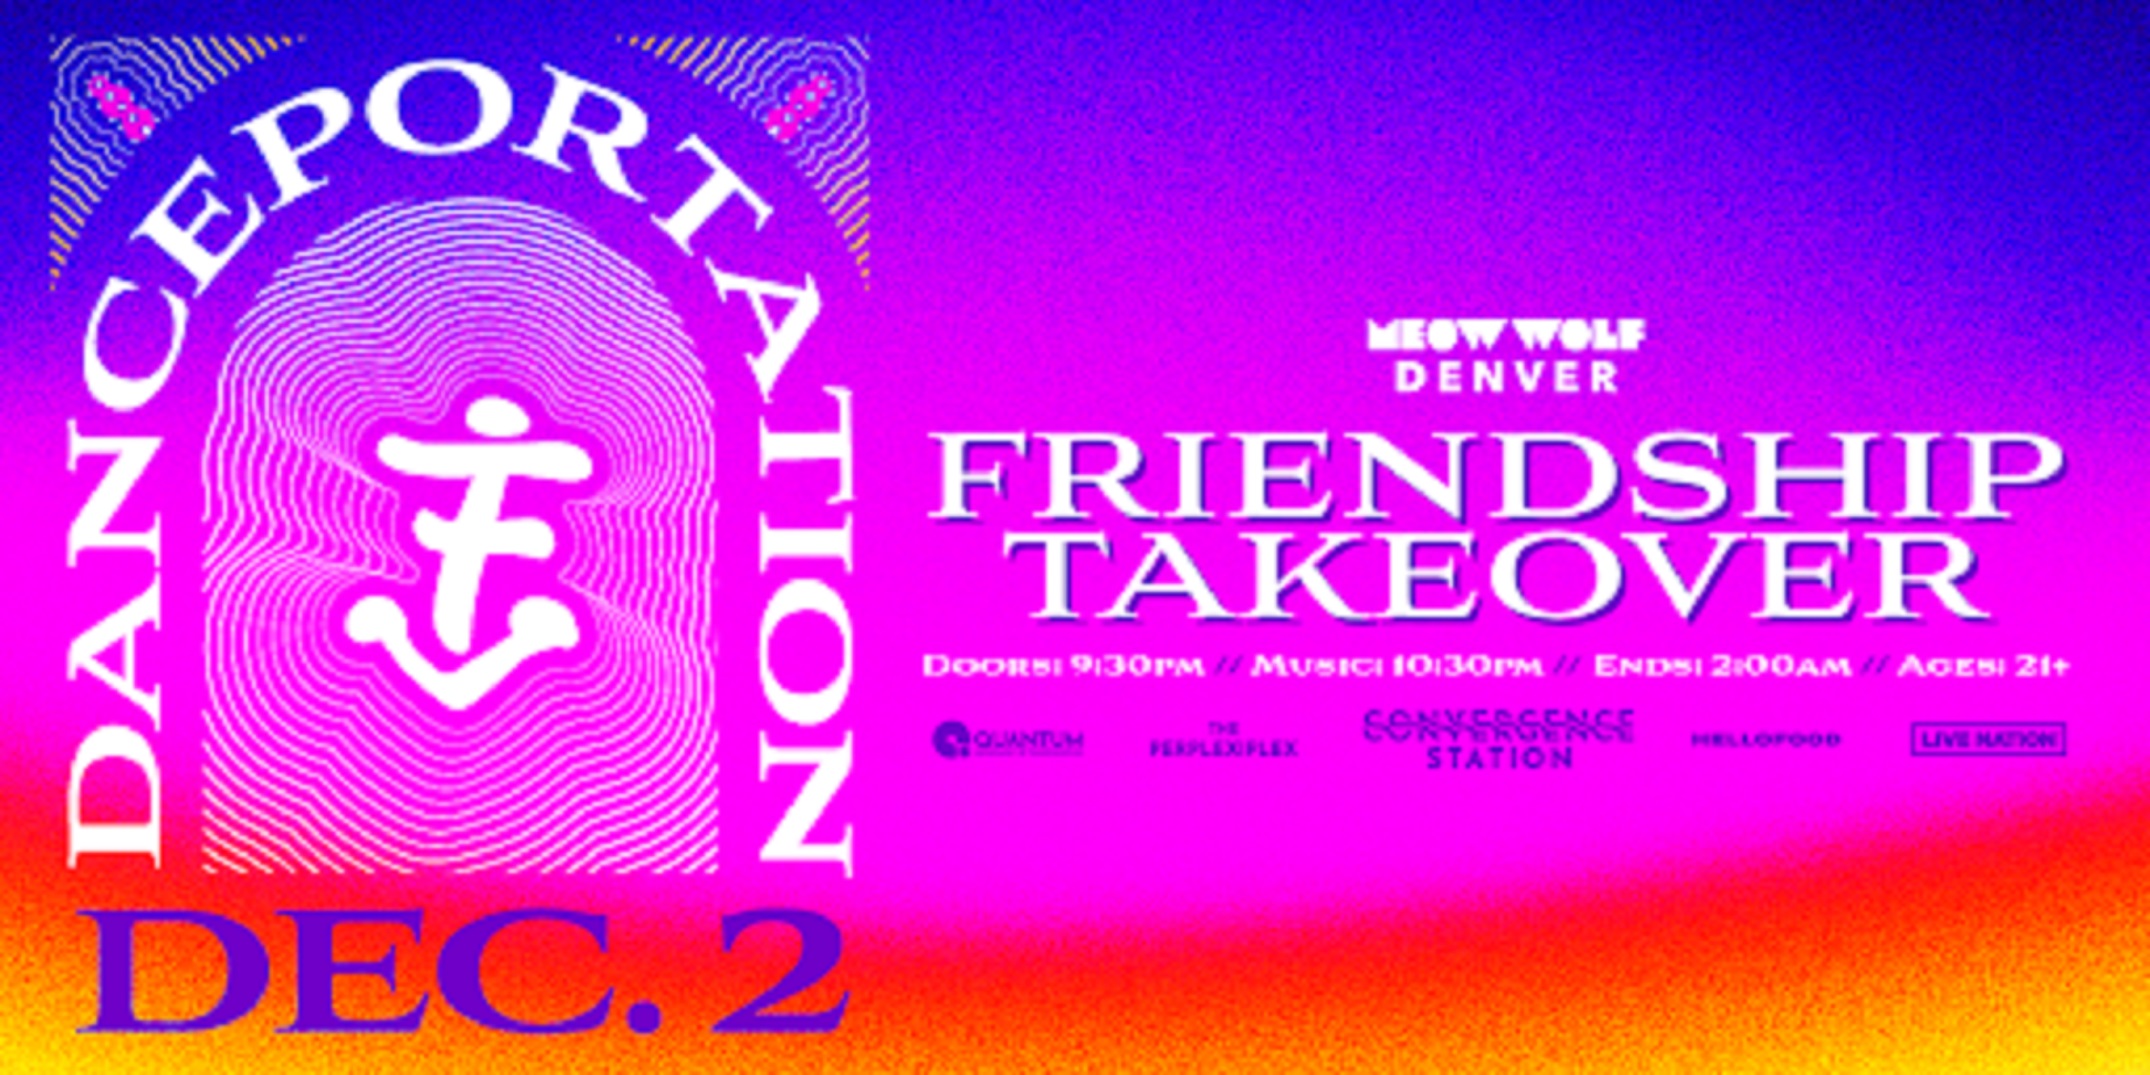 MEOW WOLF DENVER ANNOUNCES FRIENDSHIP TAKEOVER AT DANCEPORTATION ON DECEMBER 2, 2023 AND TICKETS ARE ON SALE